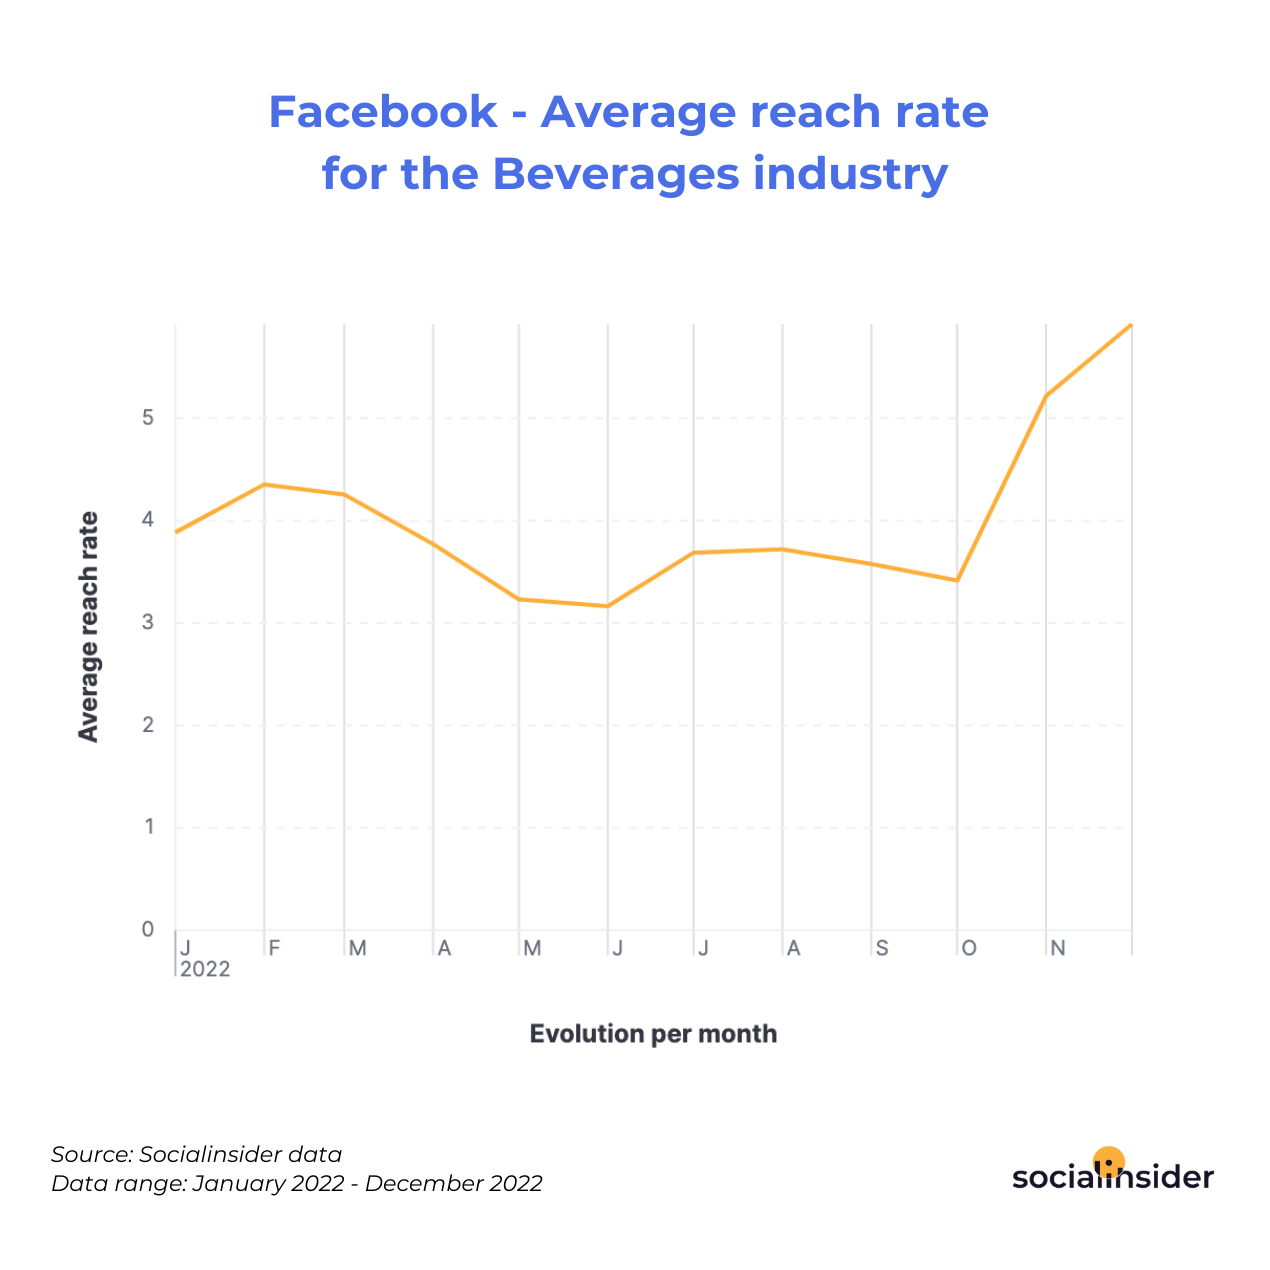 Facebook - Average reach rate for the Beverages industry 